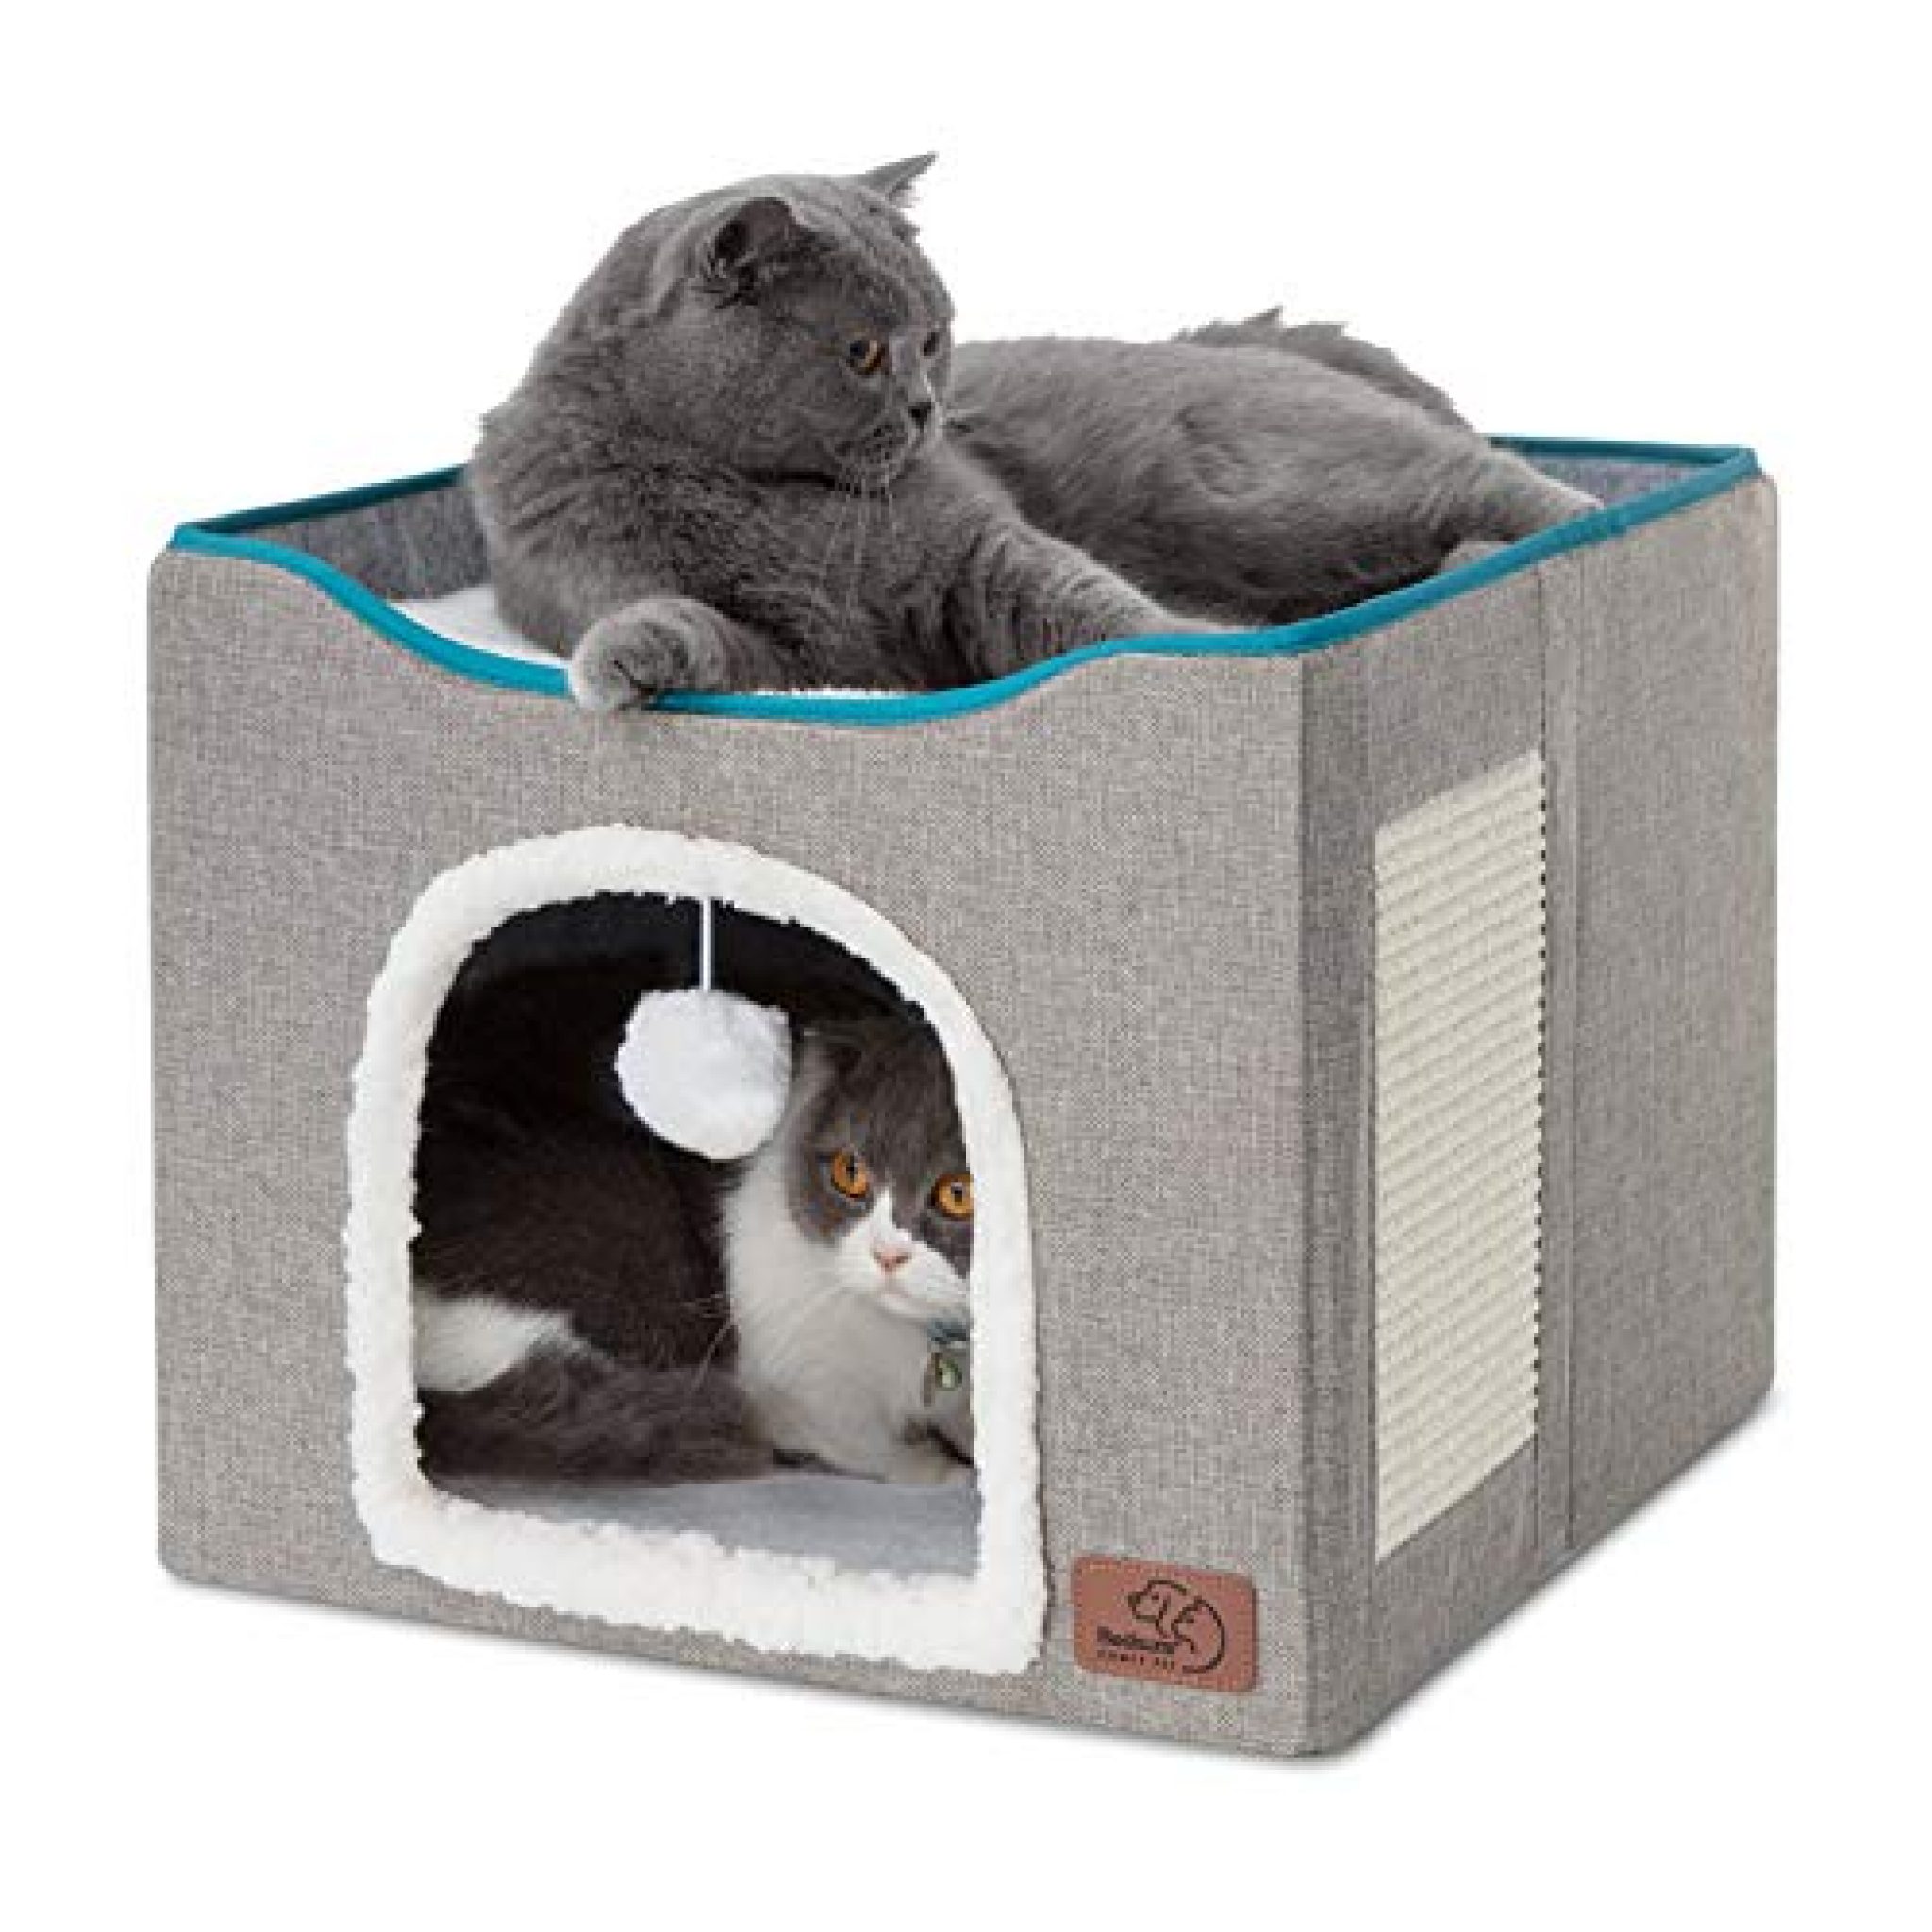 Bedsure Cat Cube Foldable Cat Cubes For Indoor Cats Cat House Indoor Large Cat Bed With